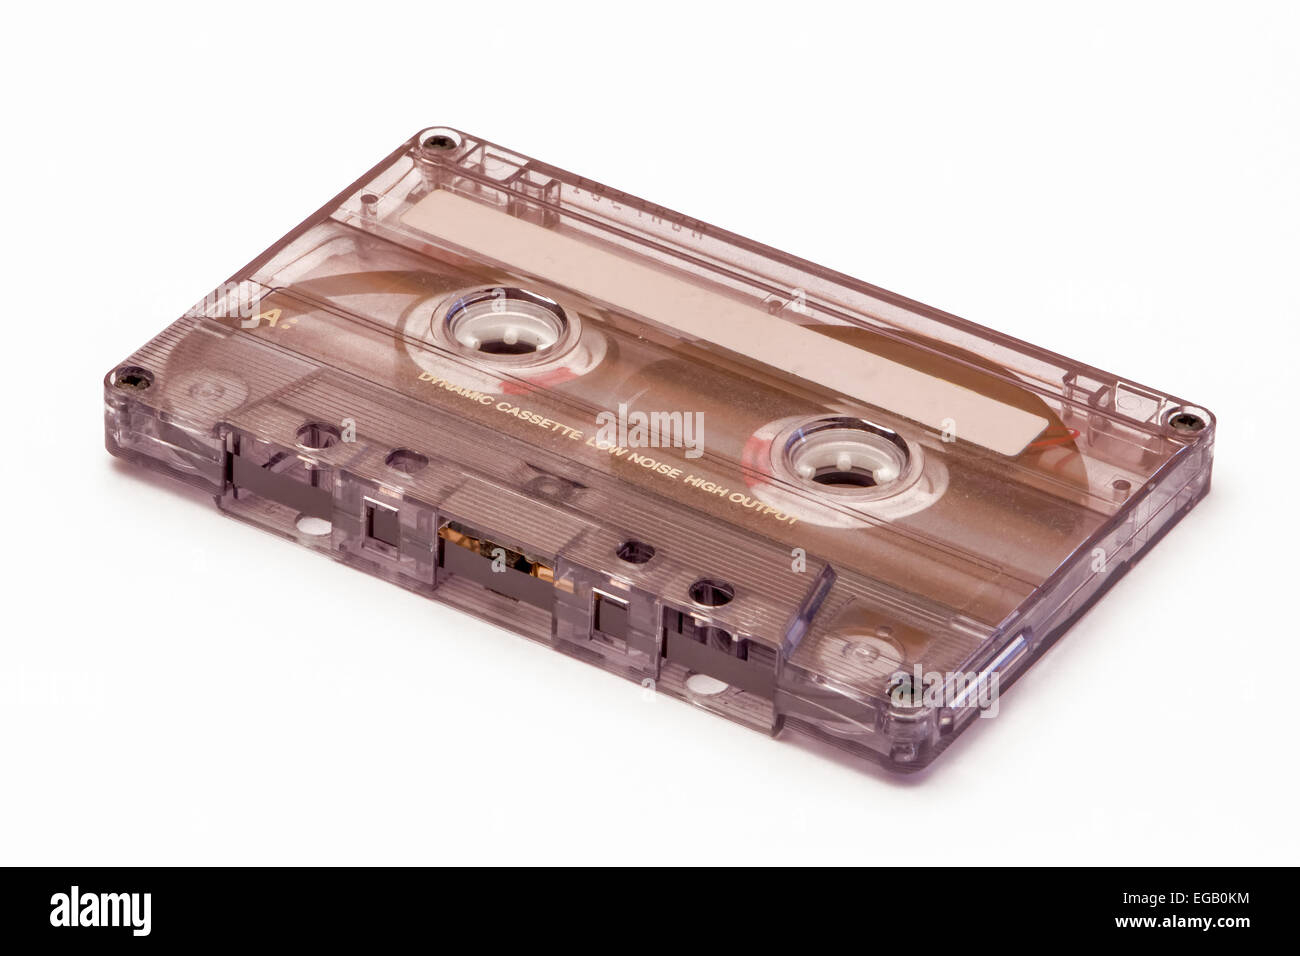 Vintage cassette tape isolated on white. Stock Photo